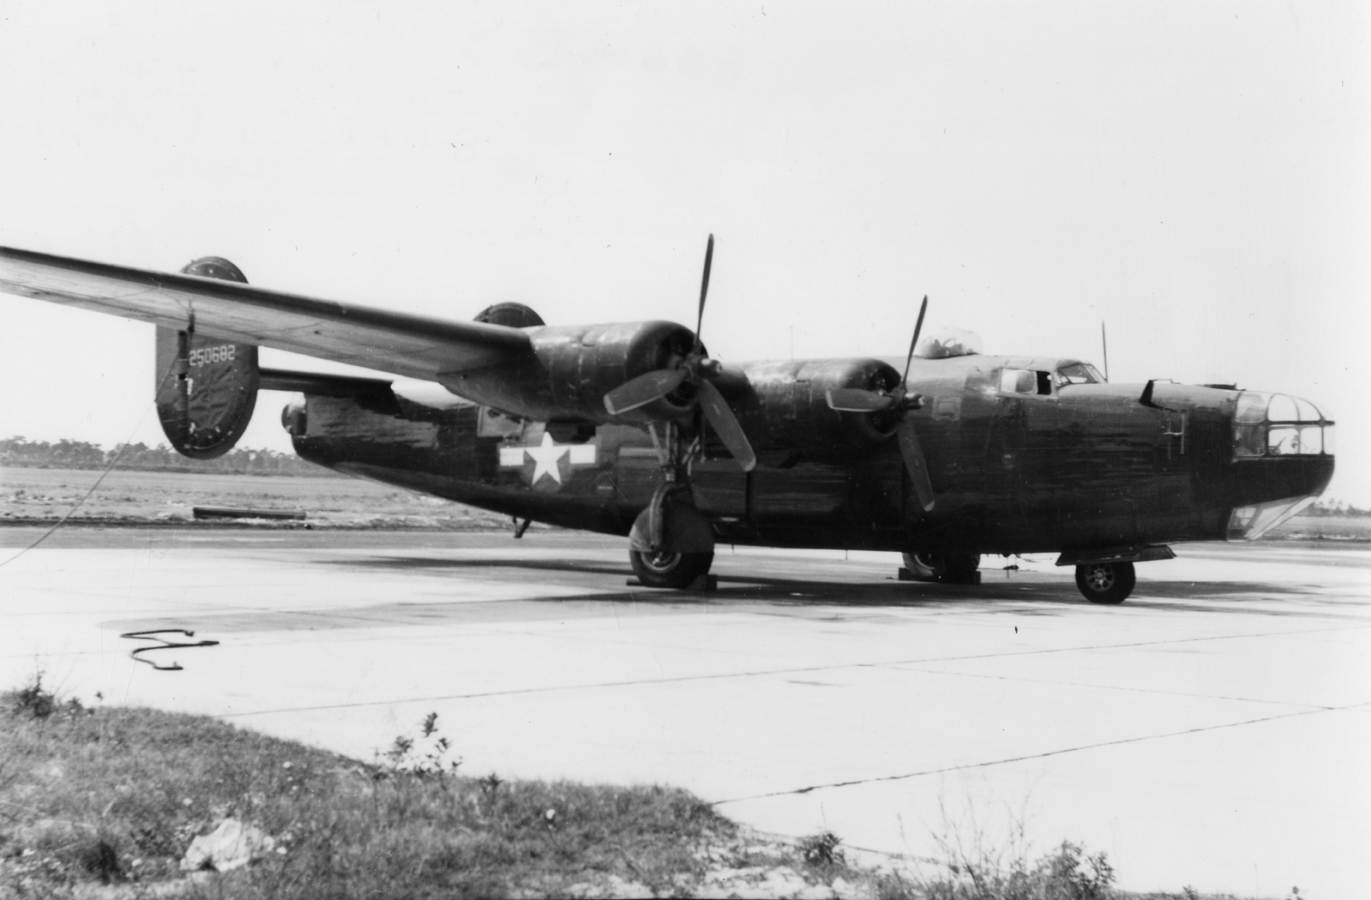 A B-24 Liberator (serial number 42-50682) of the 492nd Bomb Group